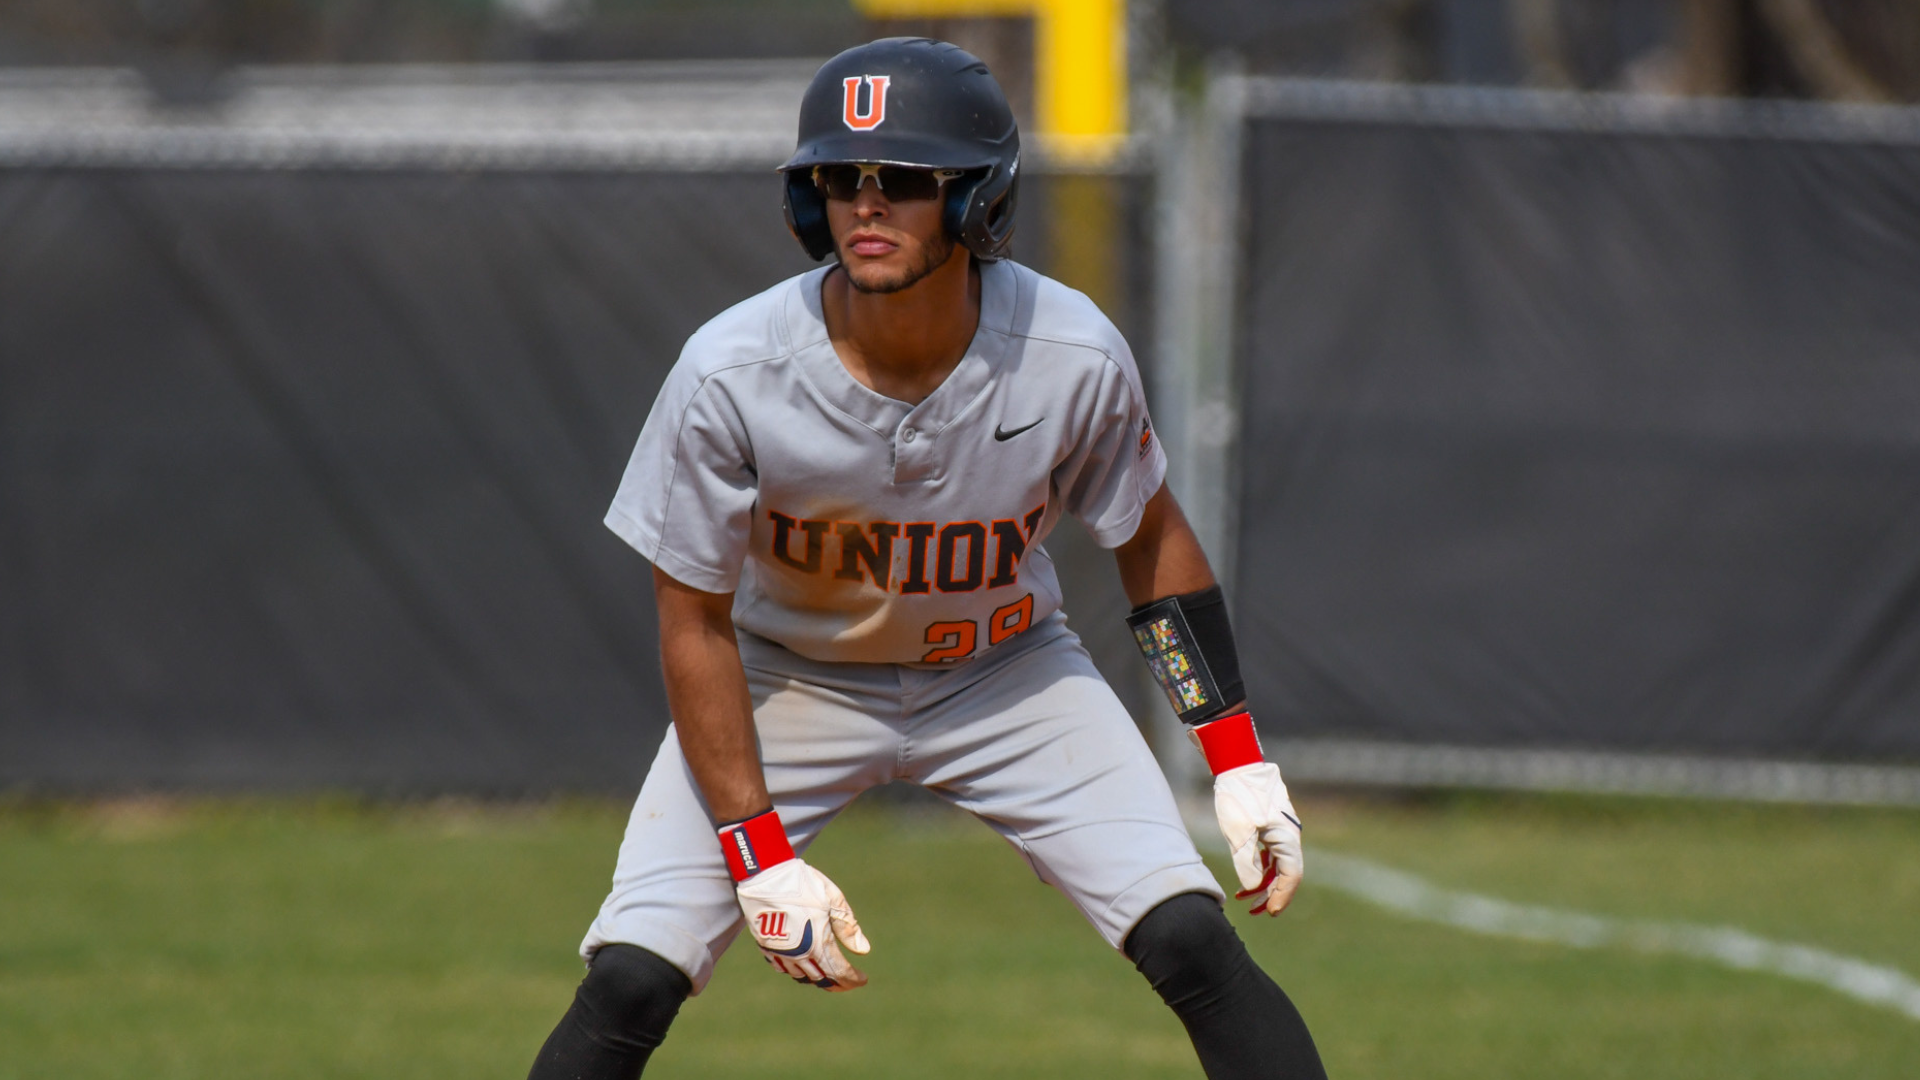 Union falls to Montreat in conference series